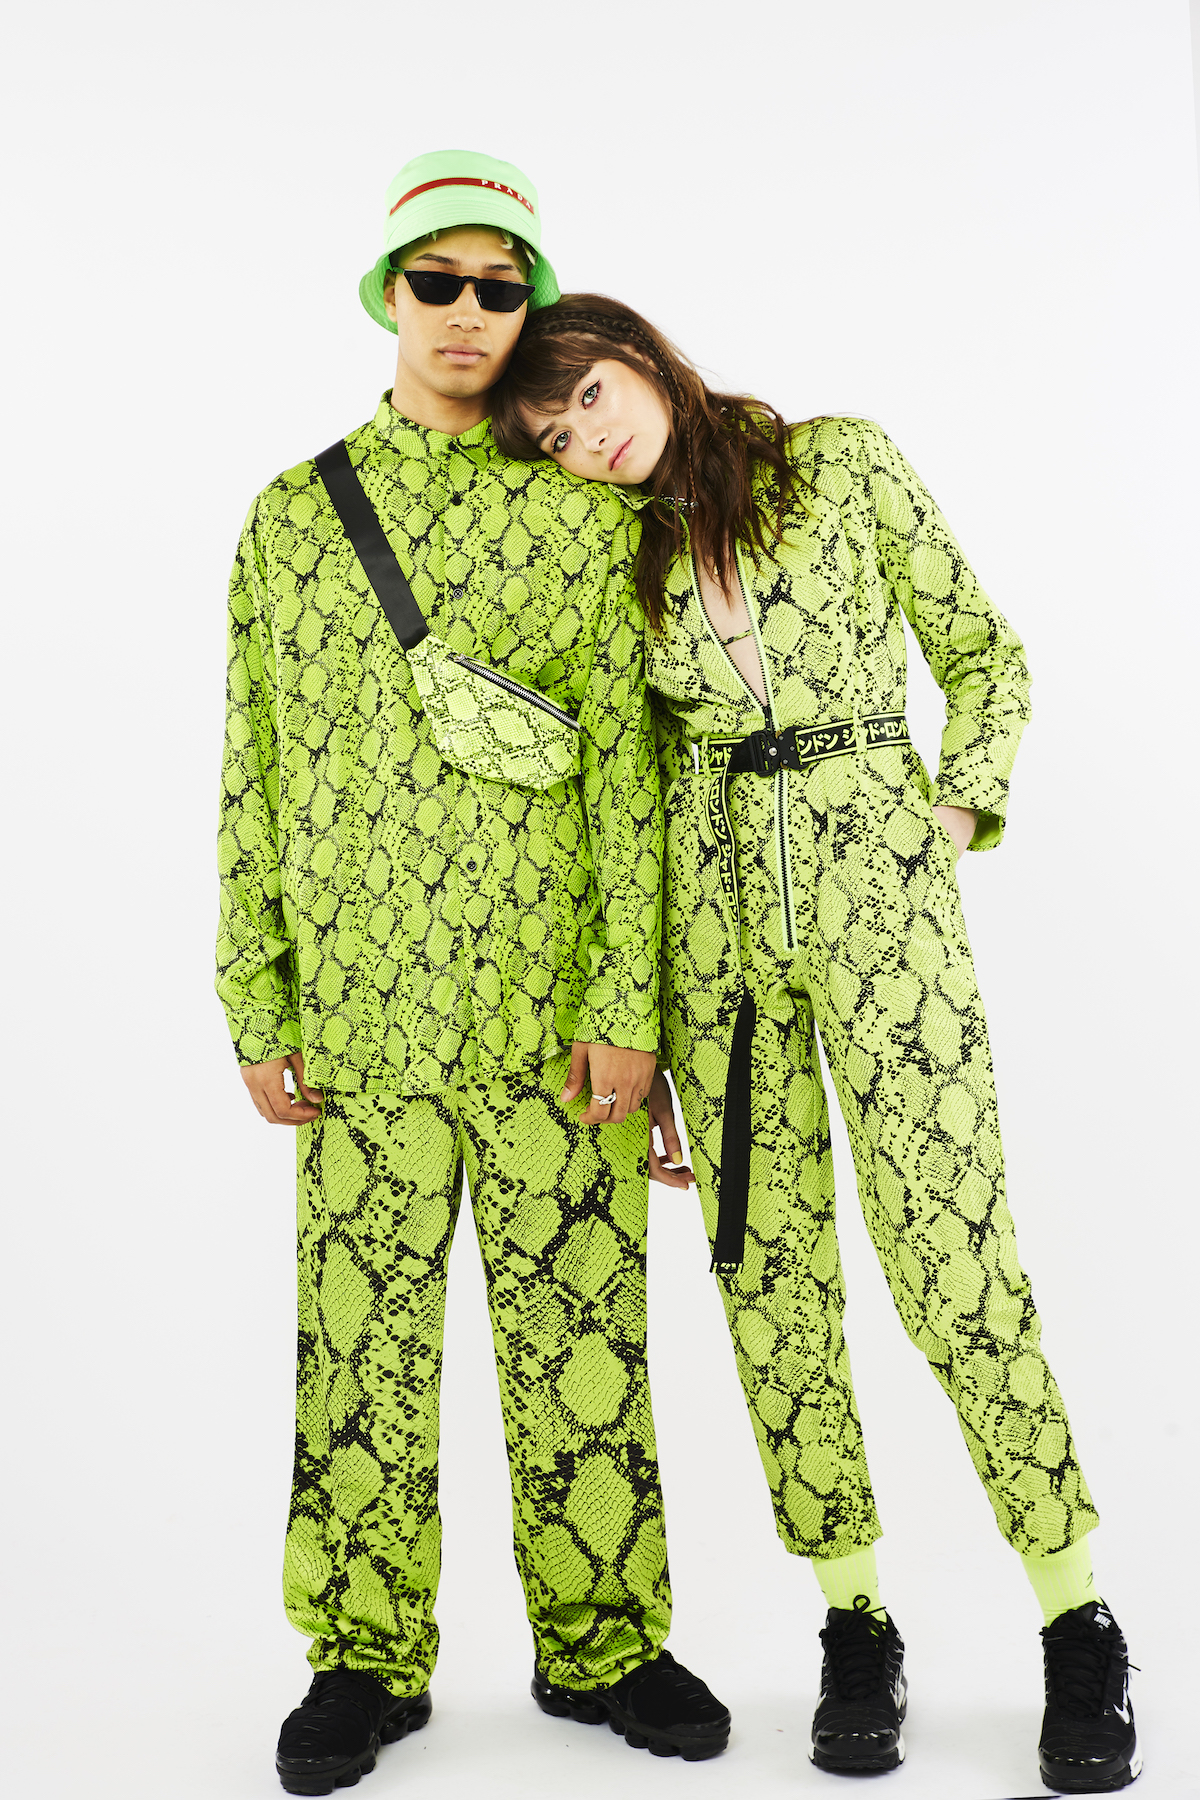 JADED MAN Launches New PARALLEL Unisex Collection